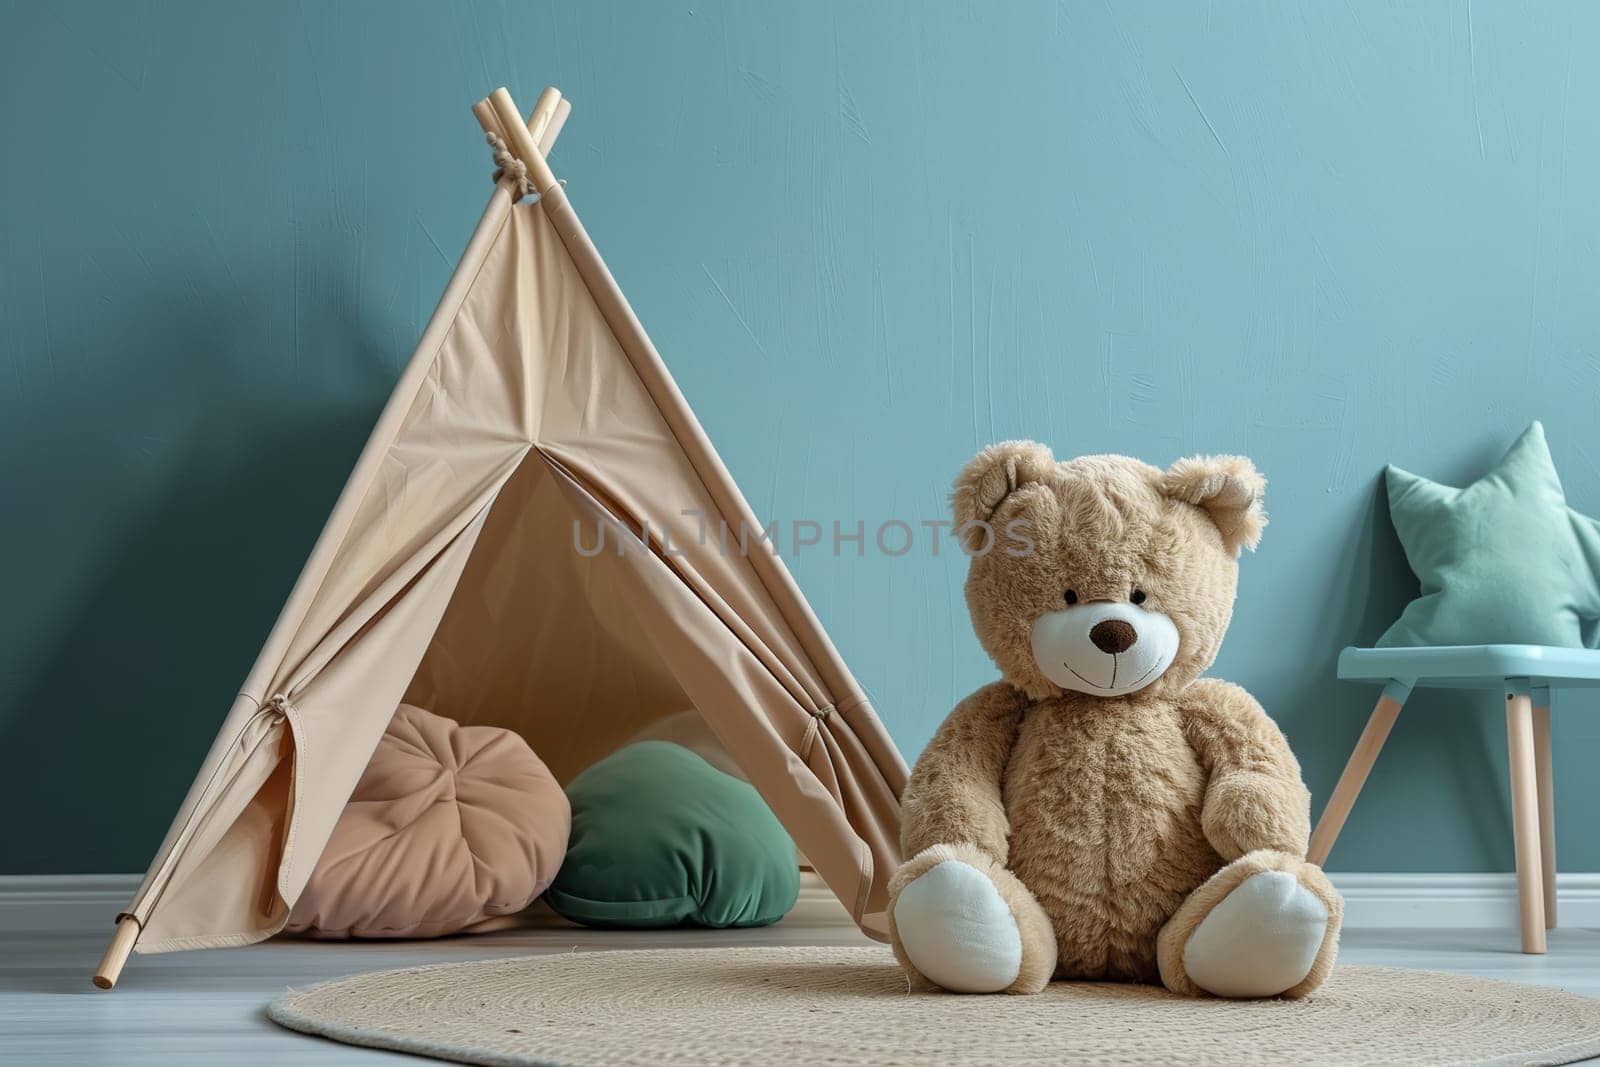 Stuffed toy Teddy bear sitting by wood teepee in room, providing comfort by richwolf